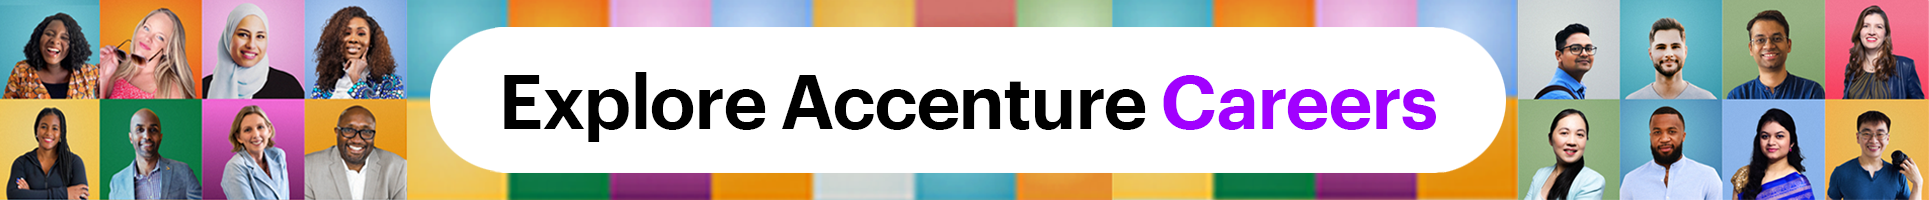 Banner for Application Tech Support Practitioner job by 8006 Accenture Inc Company